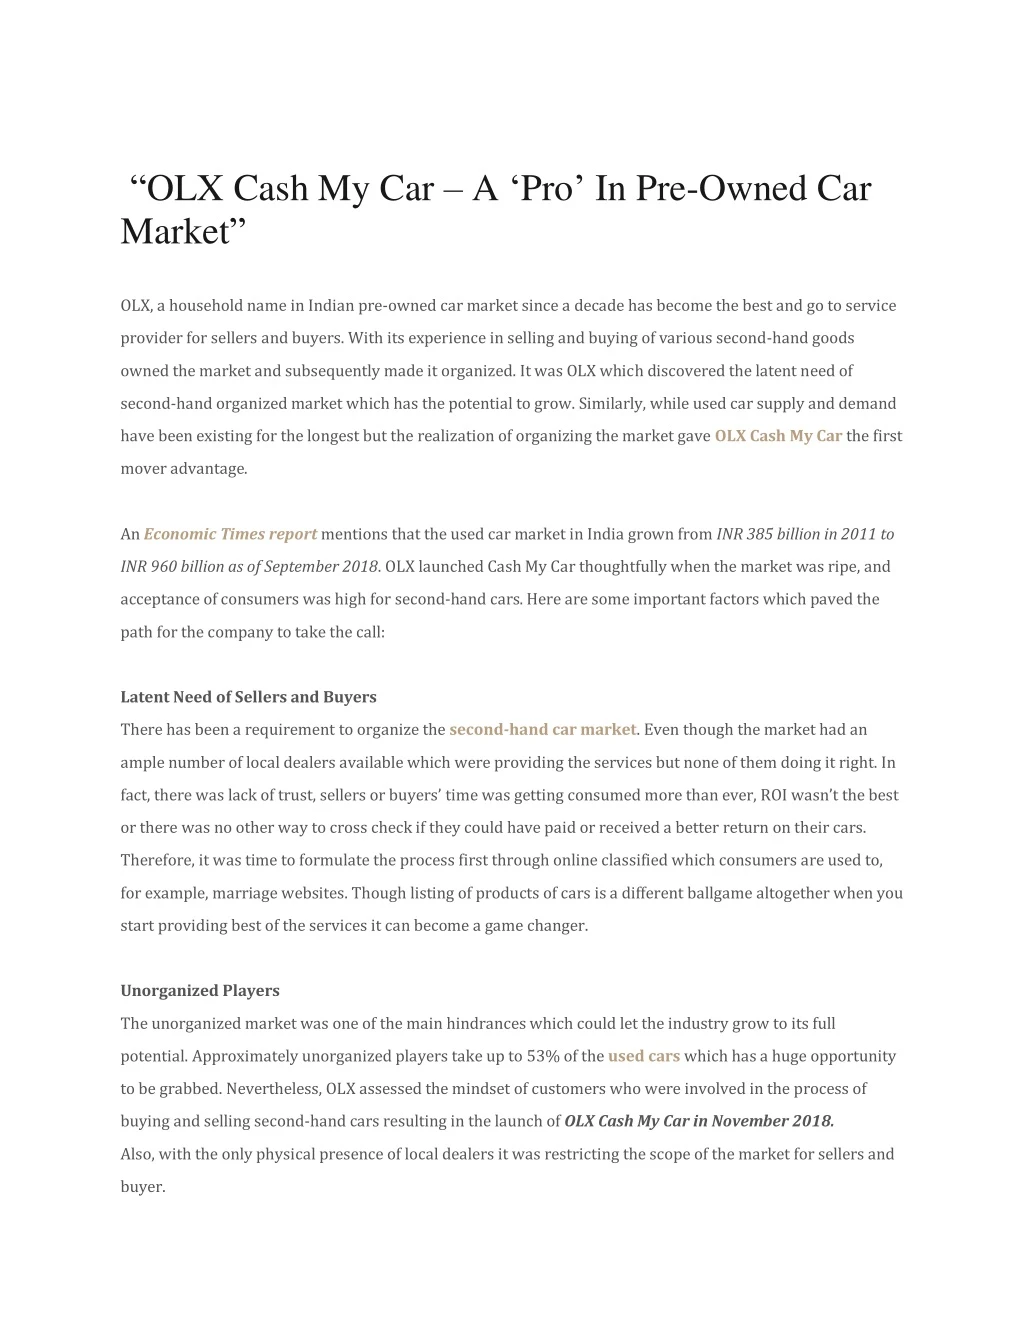 olx cash my car a pro in pre owned car market